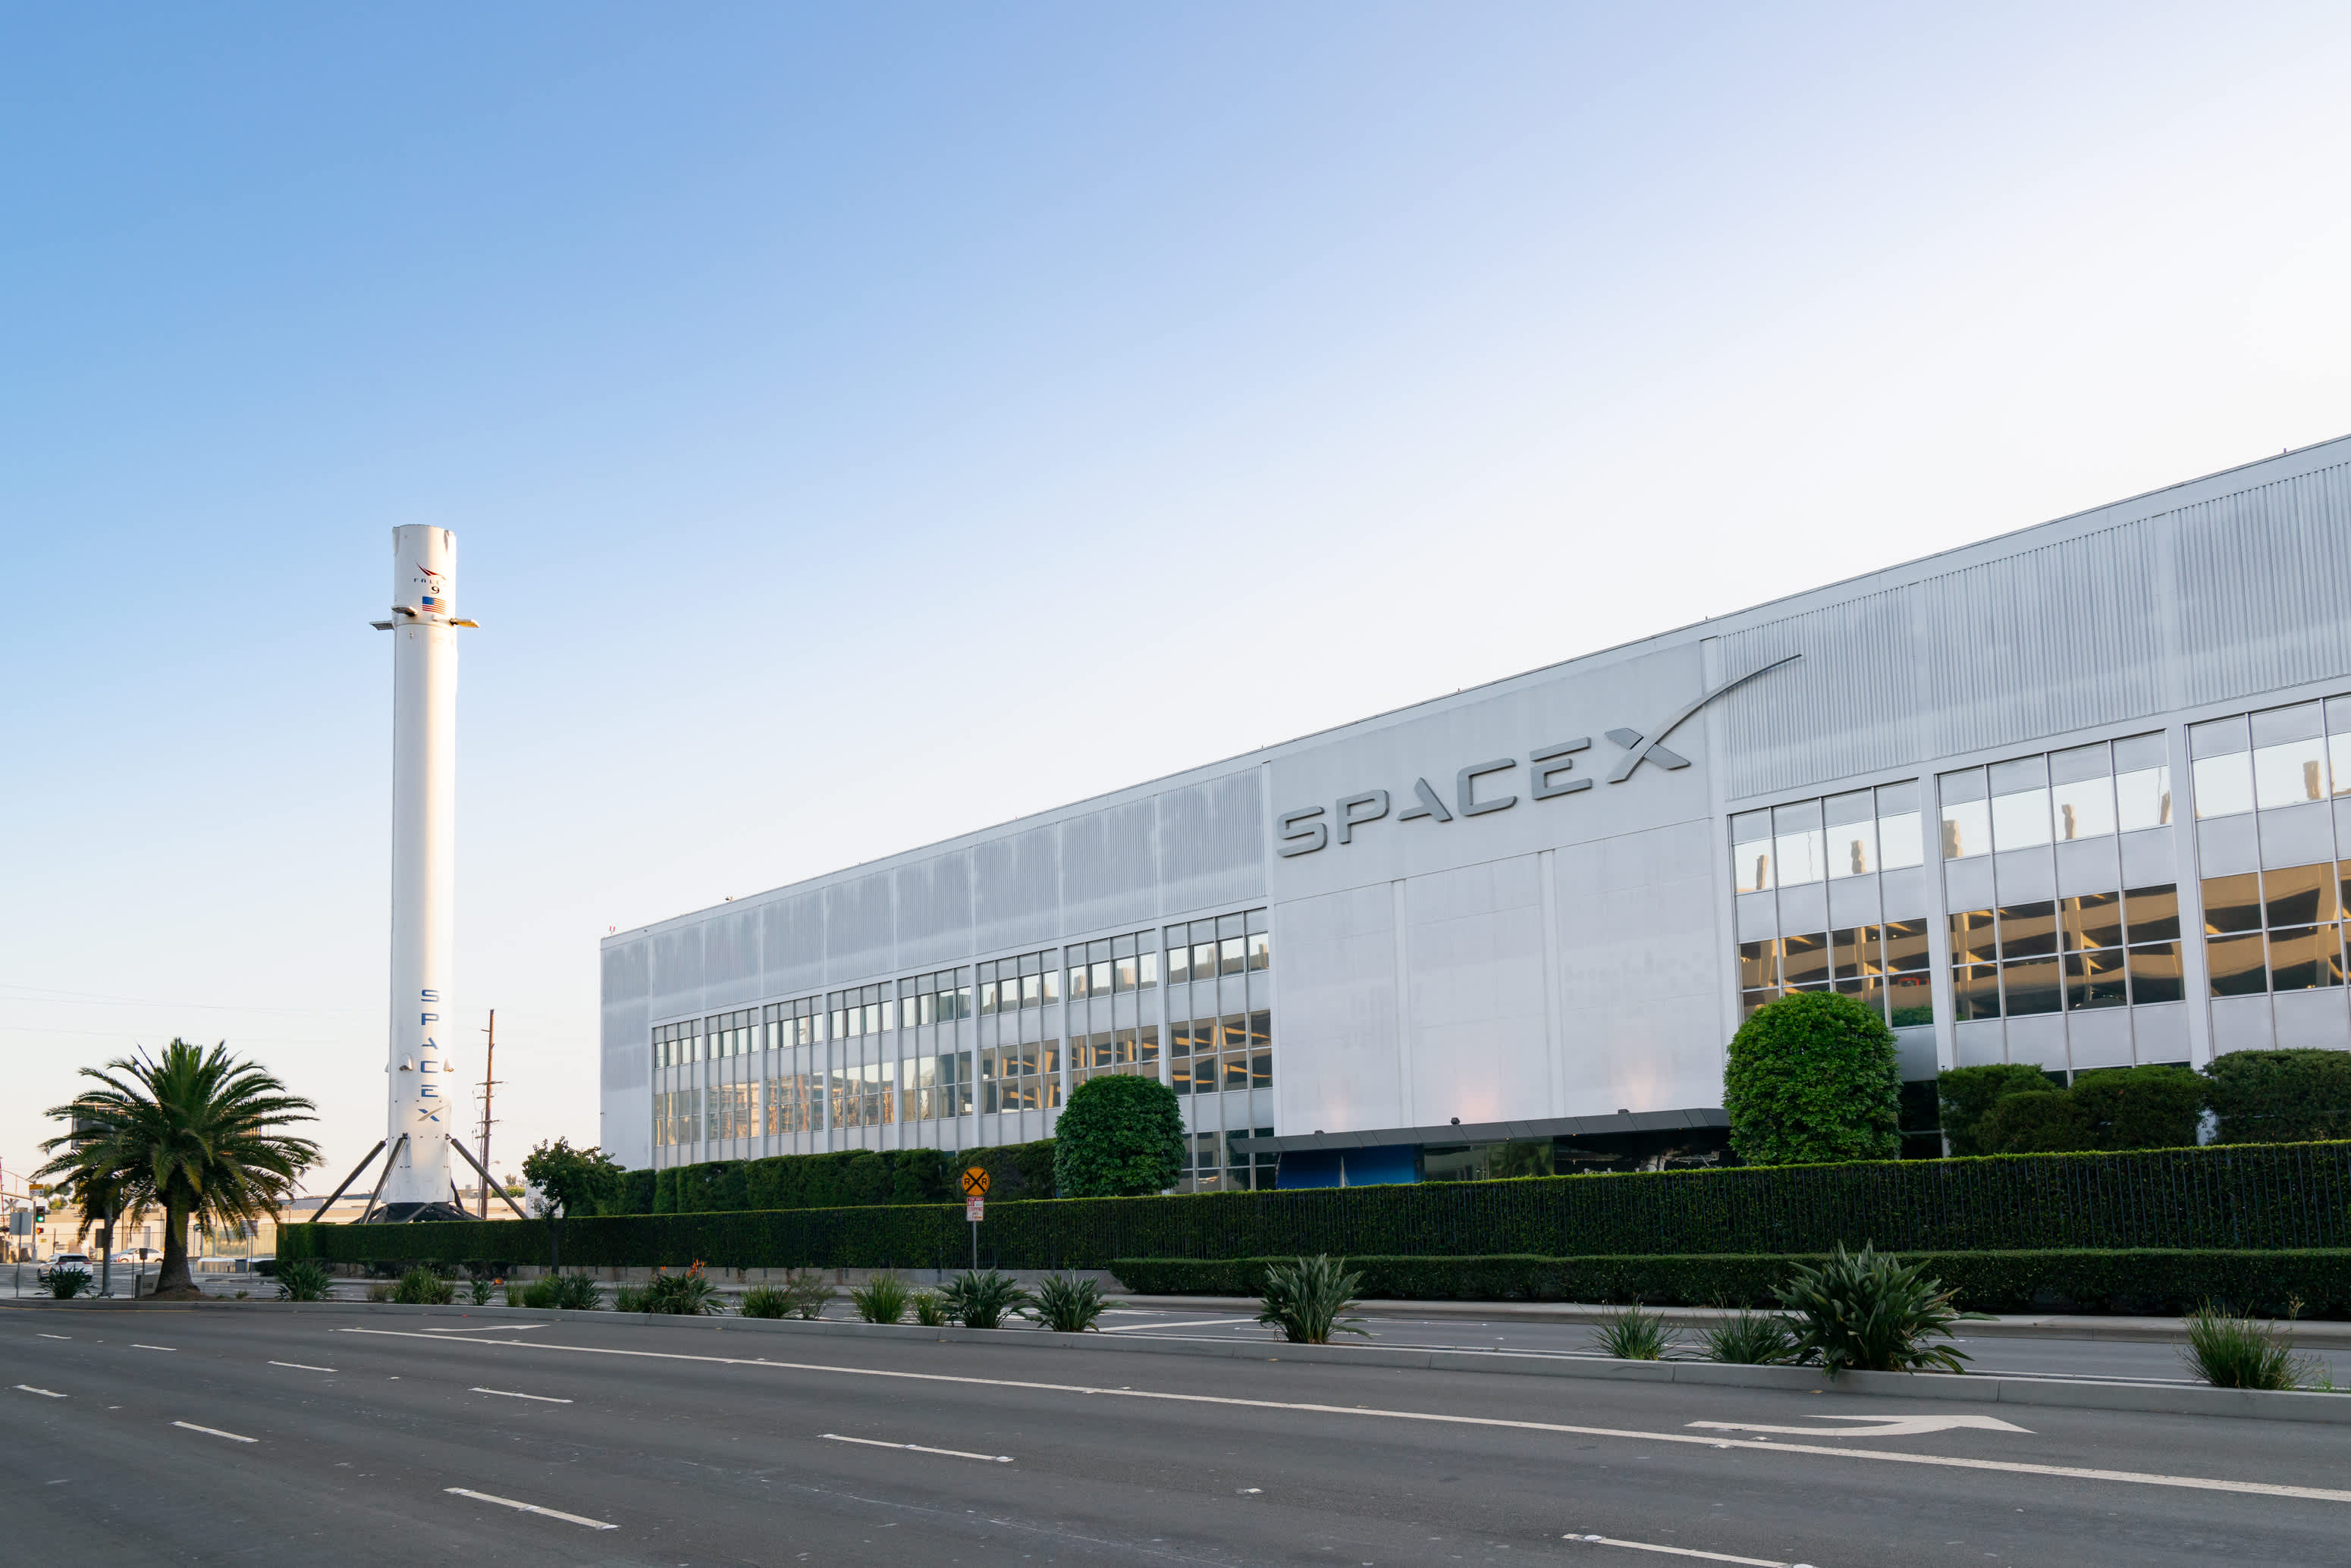 Federal judge rules SpaceX must comply with DOJ subpoena of hiring records - CNBC